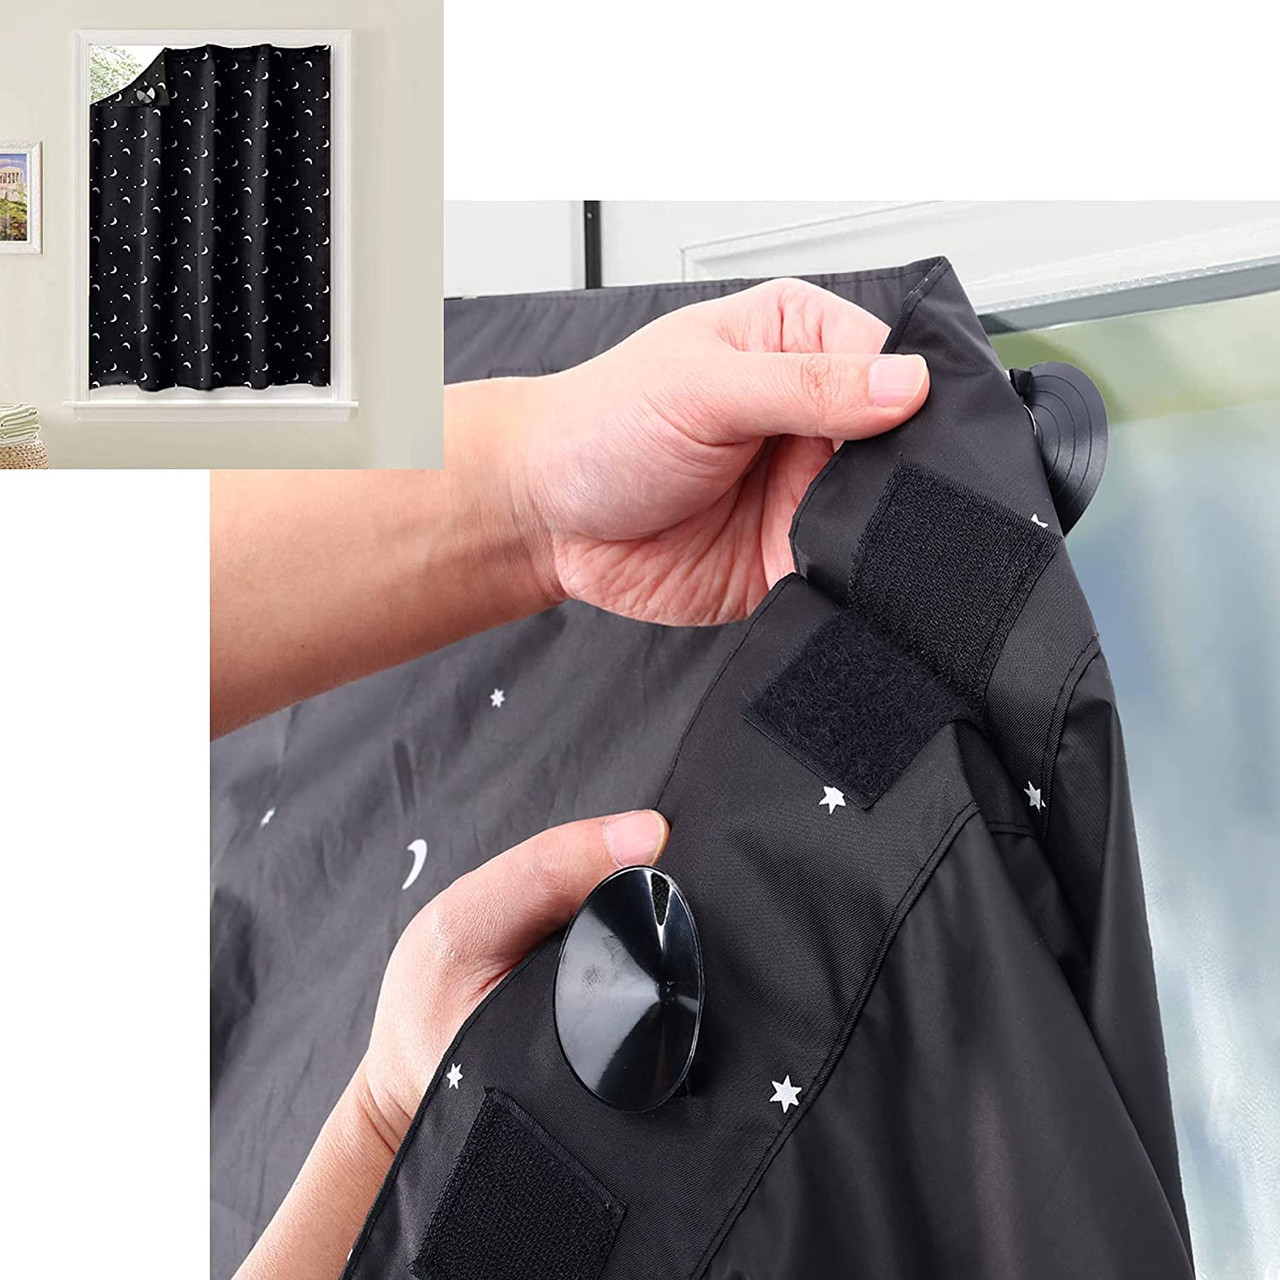 Portable Blackout Curtains - I Love Baby Rentals